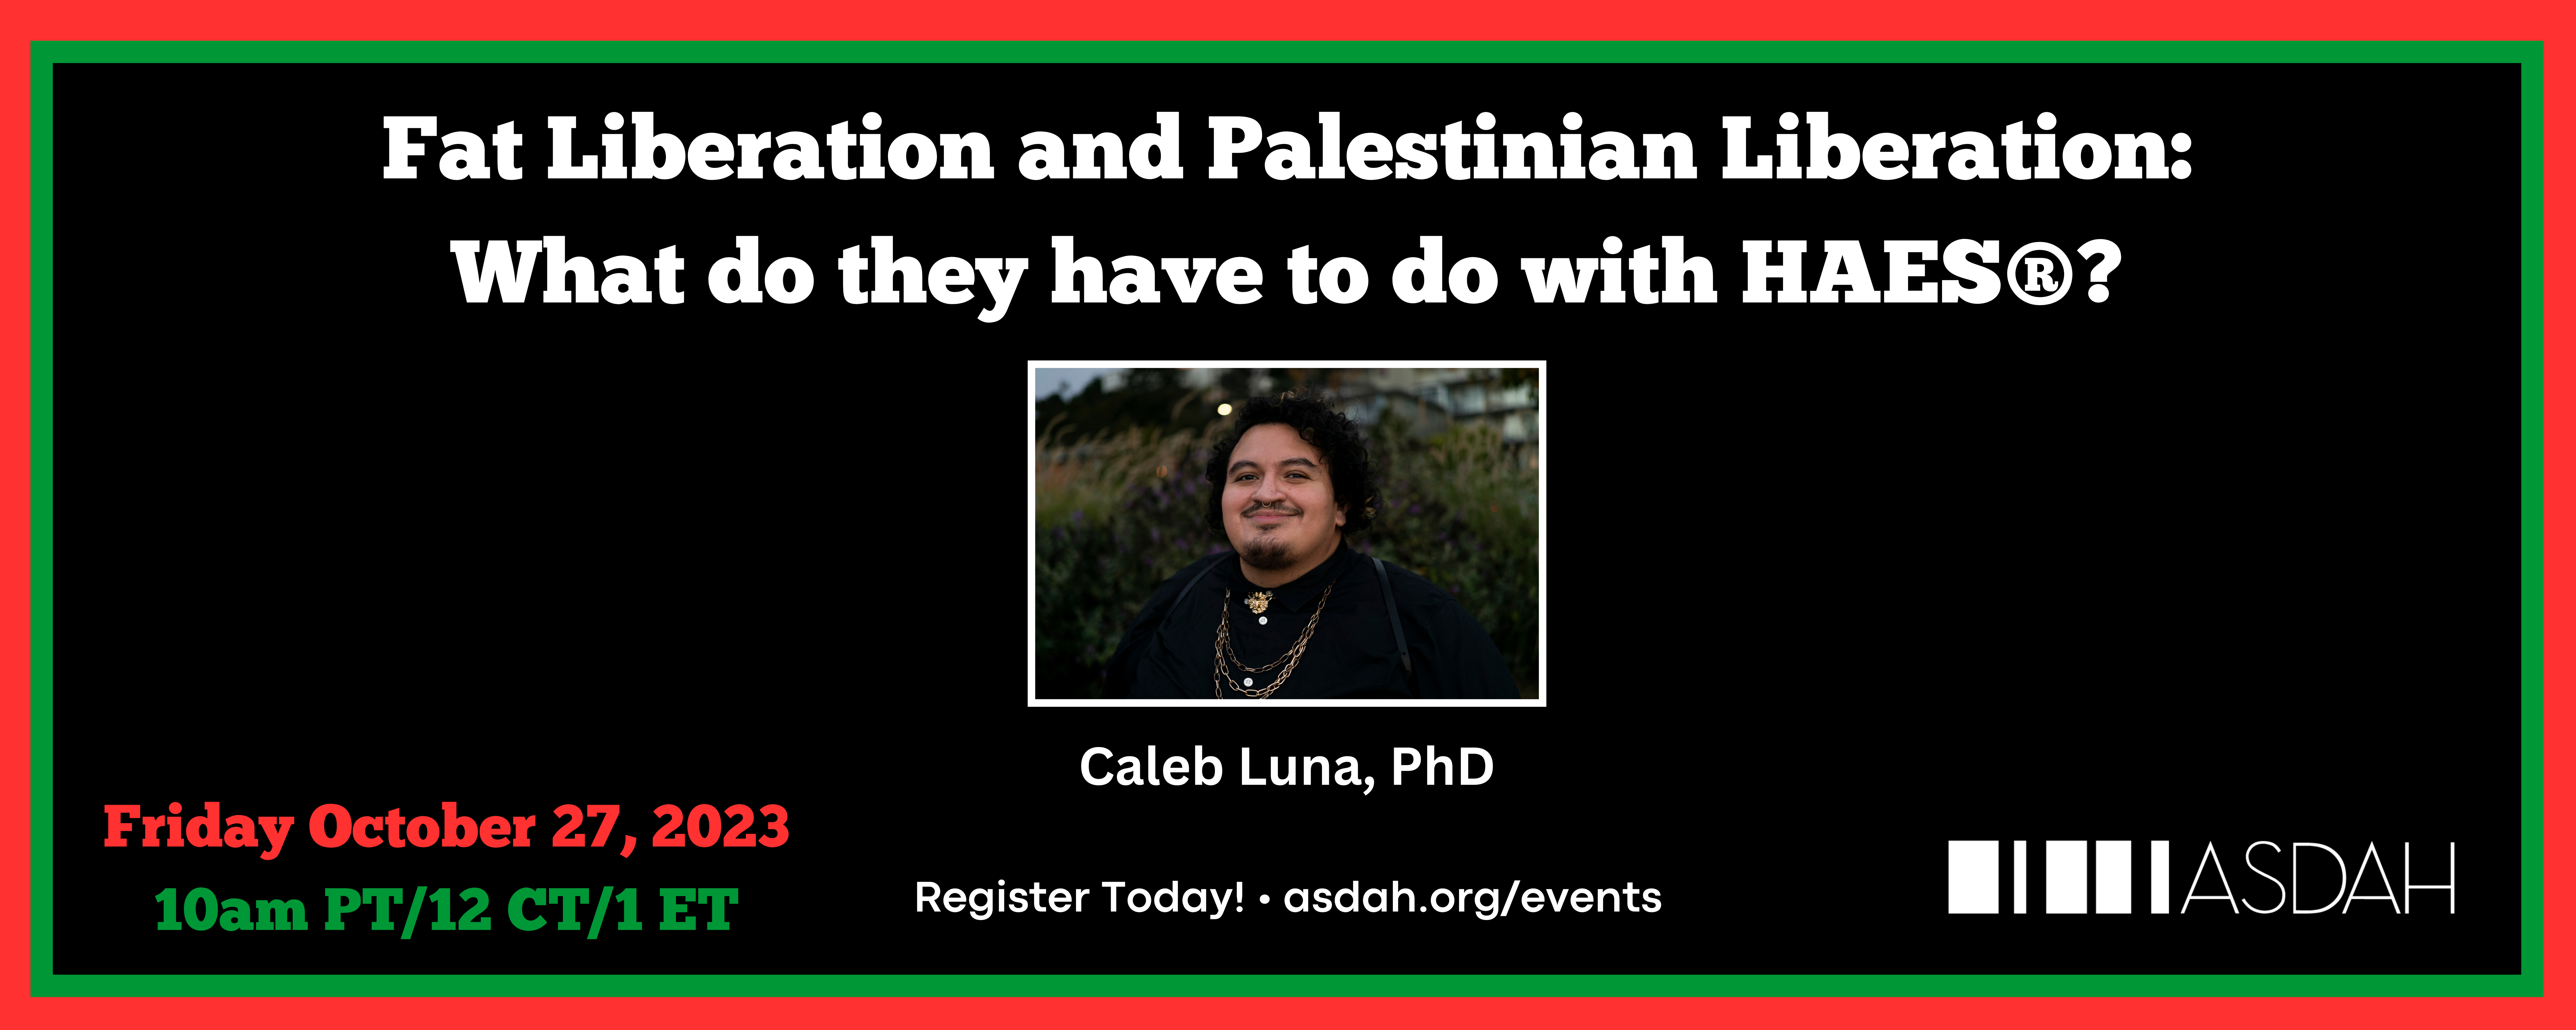 Black Banner with red and green border, mostly white bold text along the top, the event date is in green and red towards the bottom. Headshot of Dr. Caleb Luna is in the center with a white border. They are smiling while wearing all black. Text reads “Fat Liberation & Palestinian Liberation: What do they have to do with HAES®? October 27th, 2023 10am PT/12pm CT/1pm ET. Register at asdah.org/events.